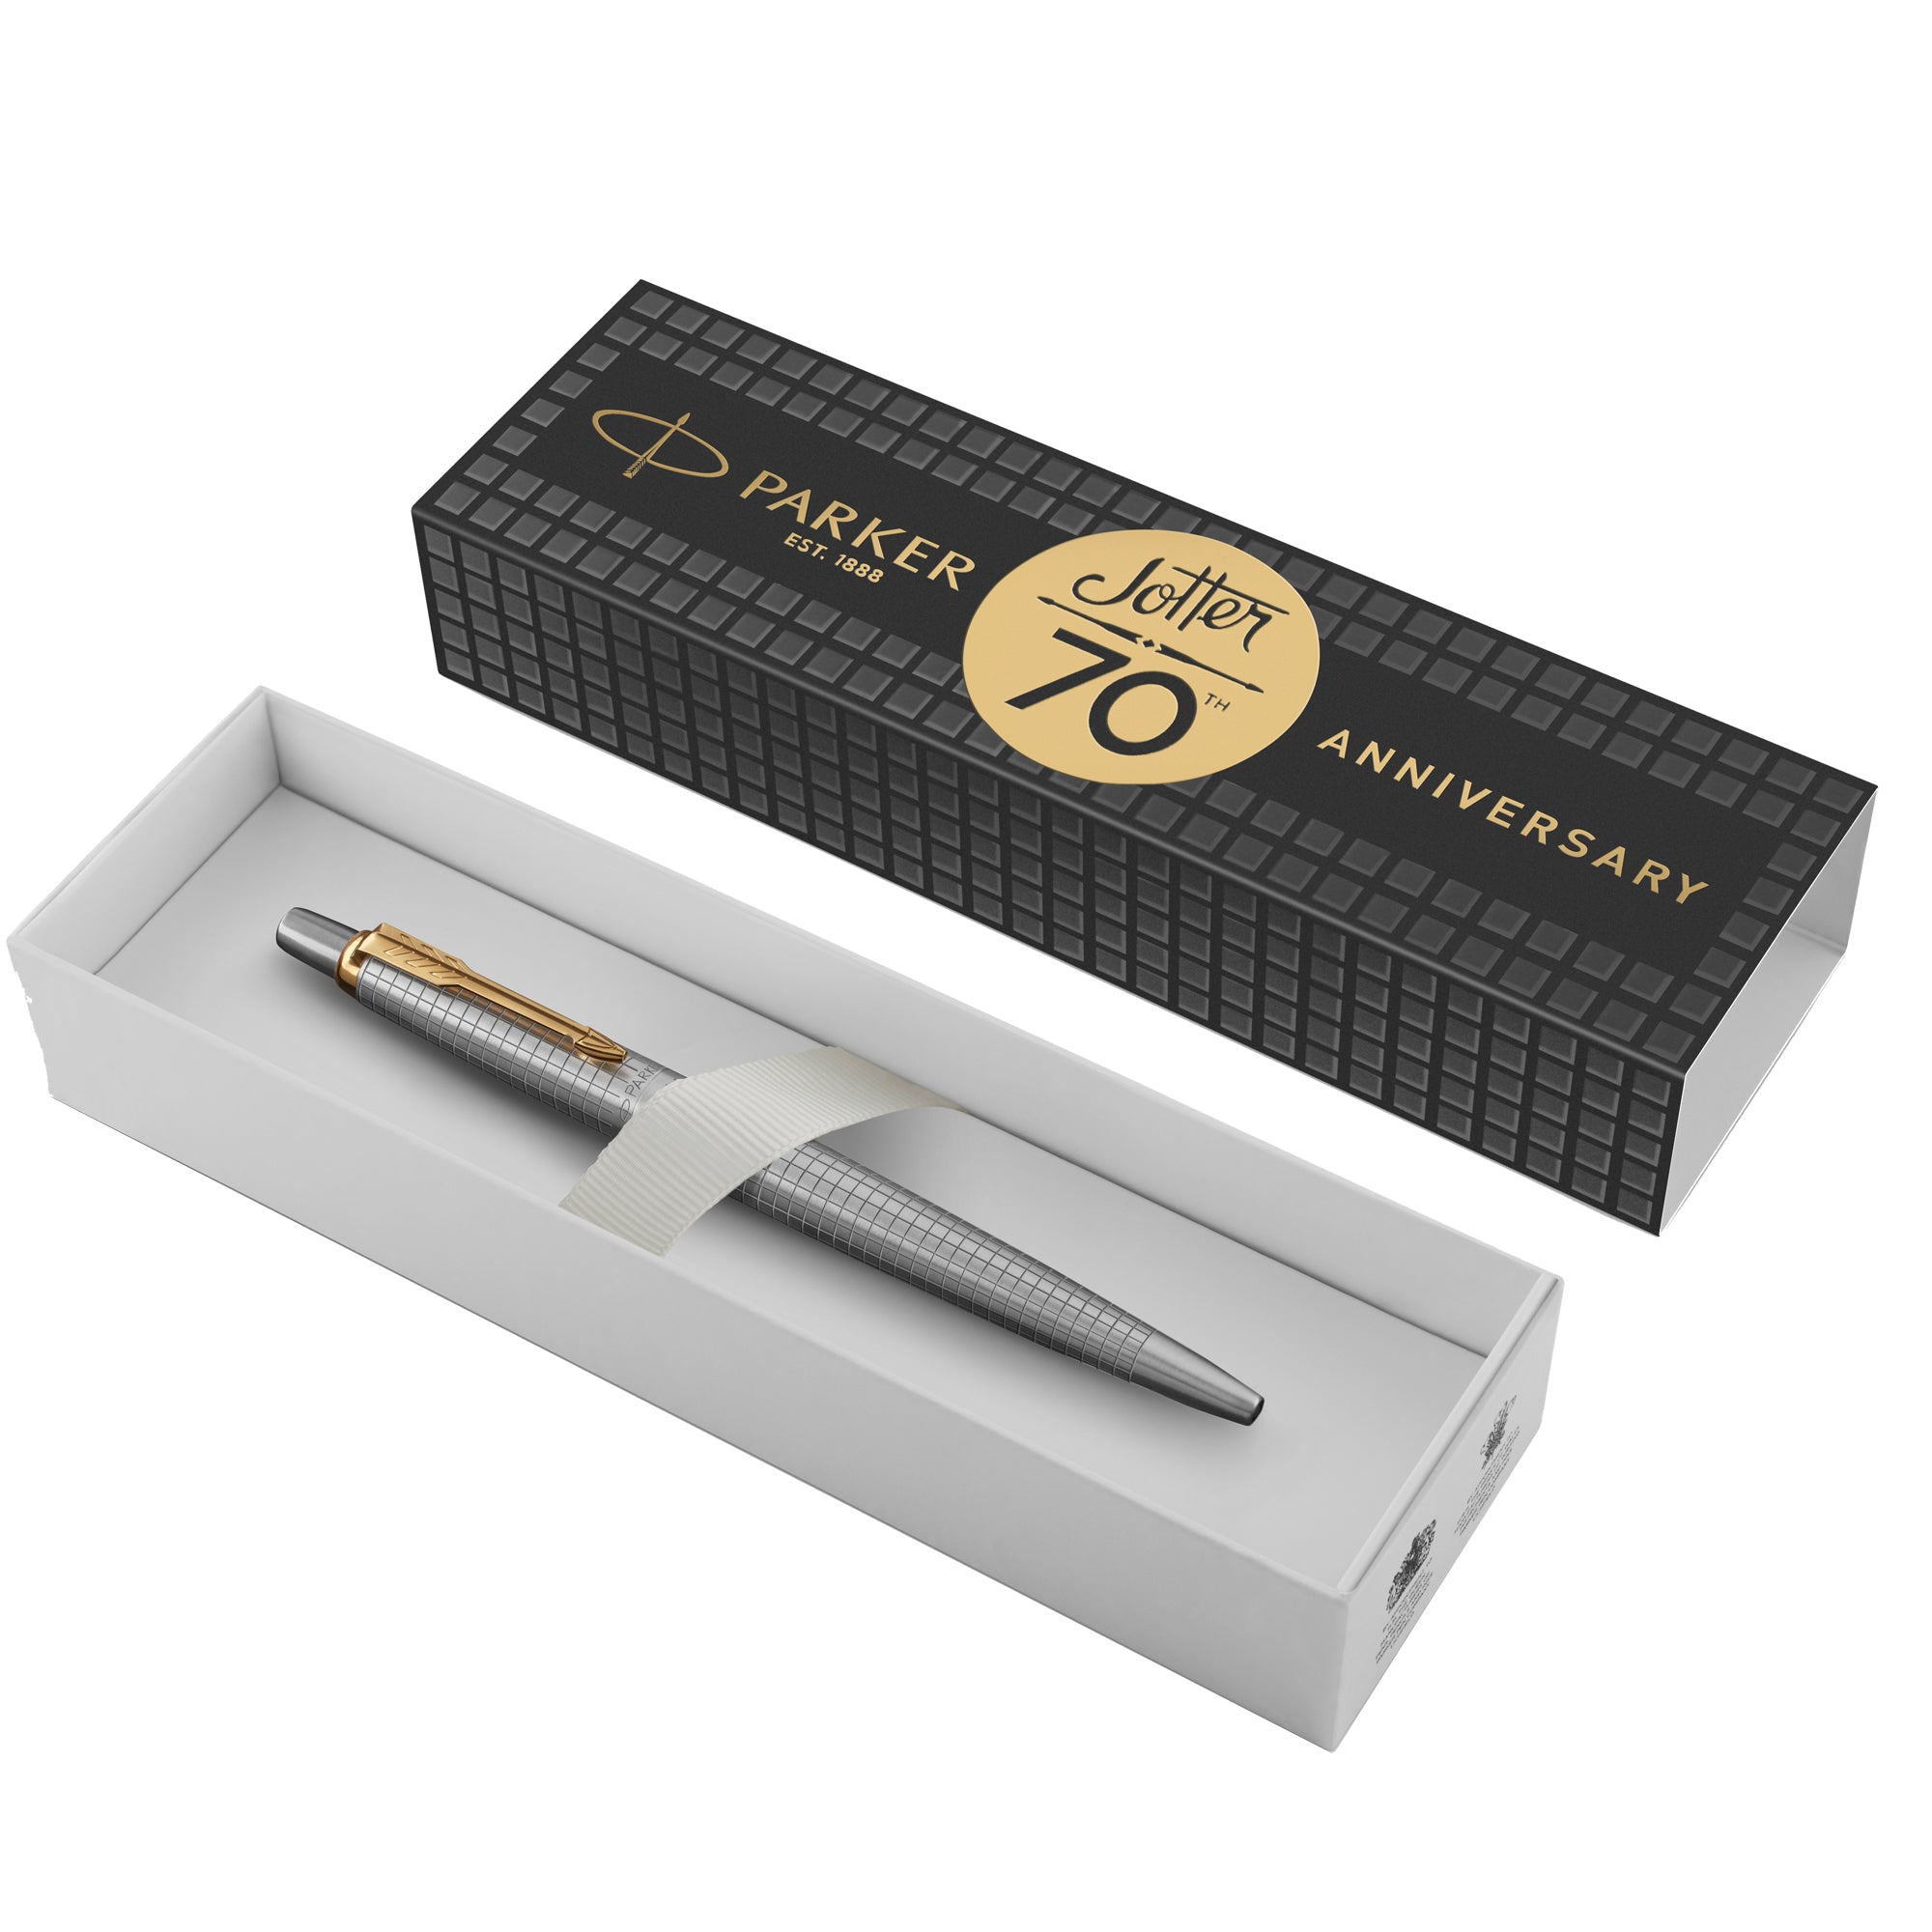 parker-penna-sfera-m-jotter-special-edition-70th-gt